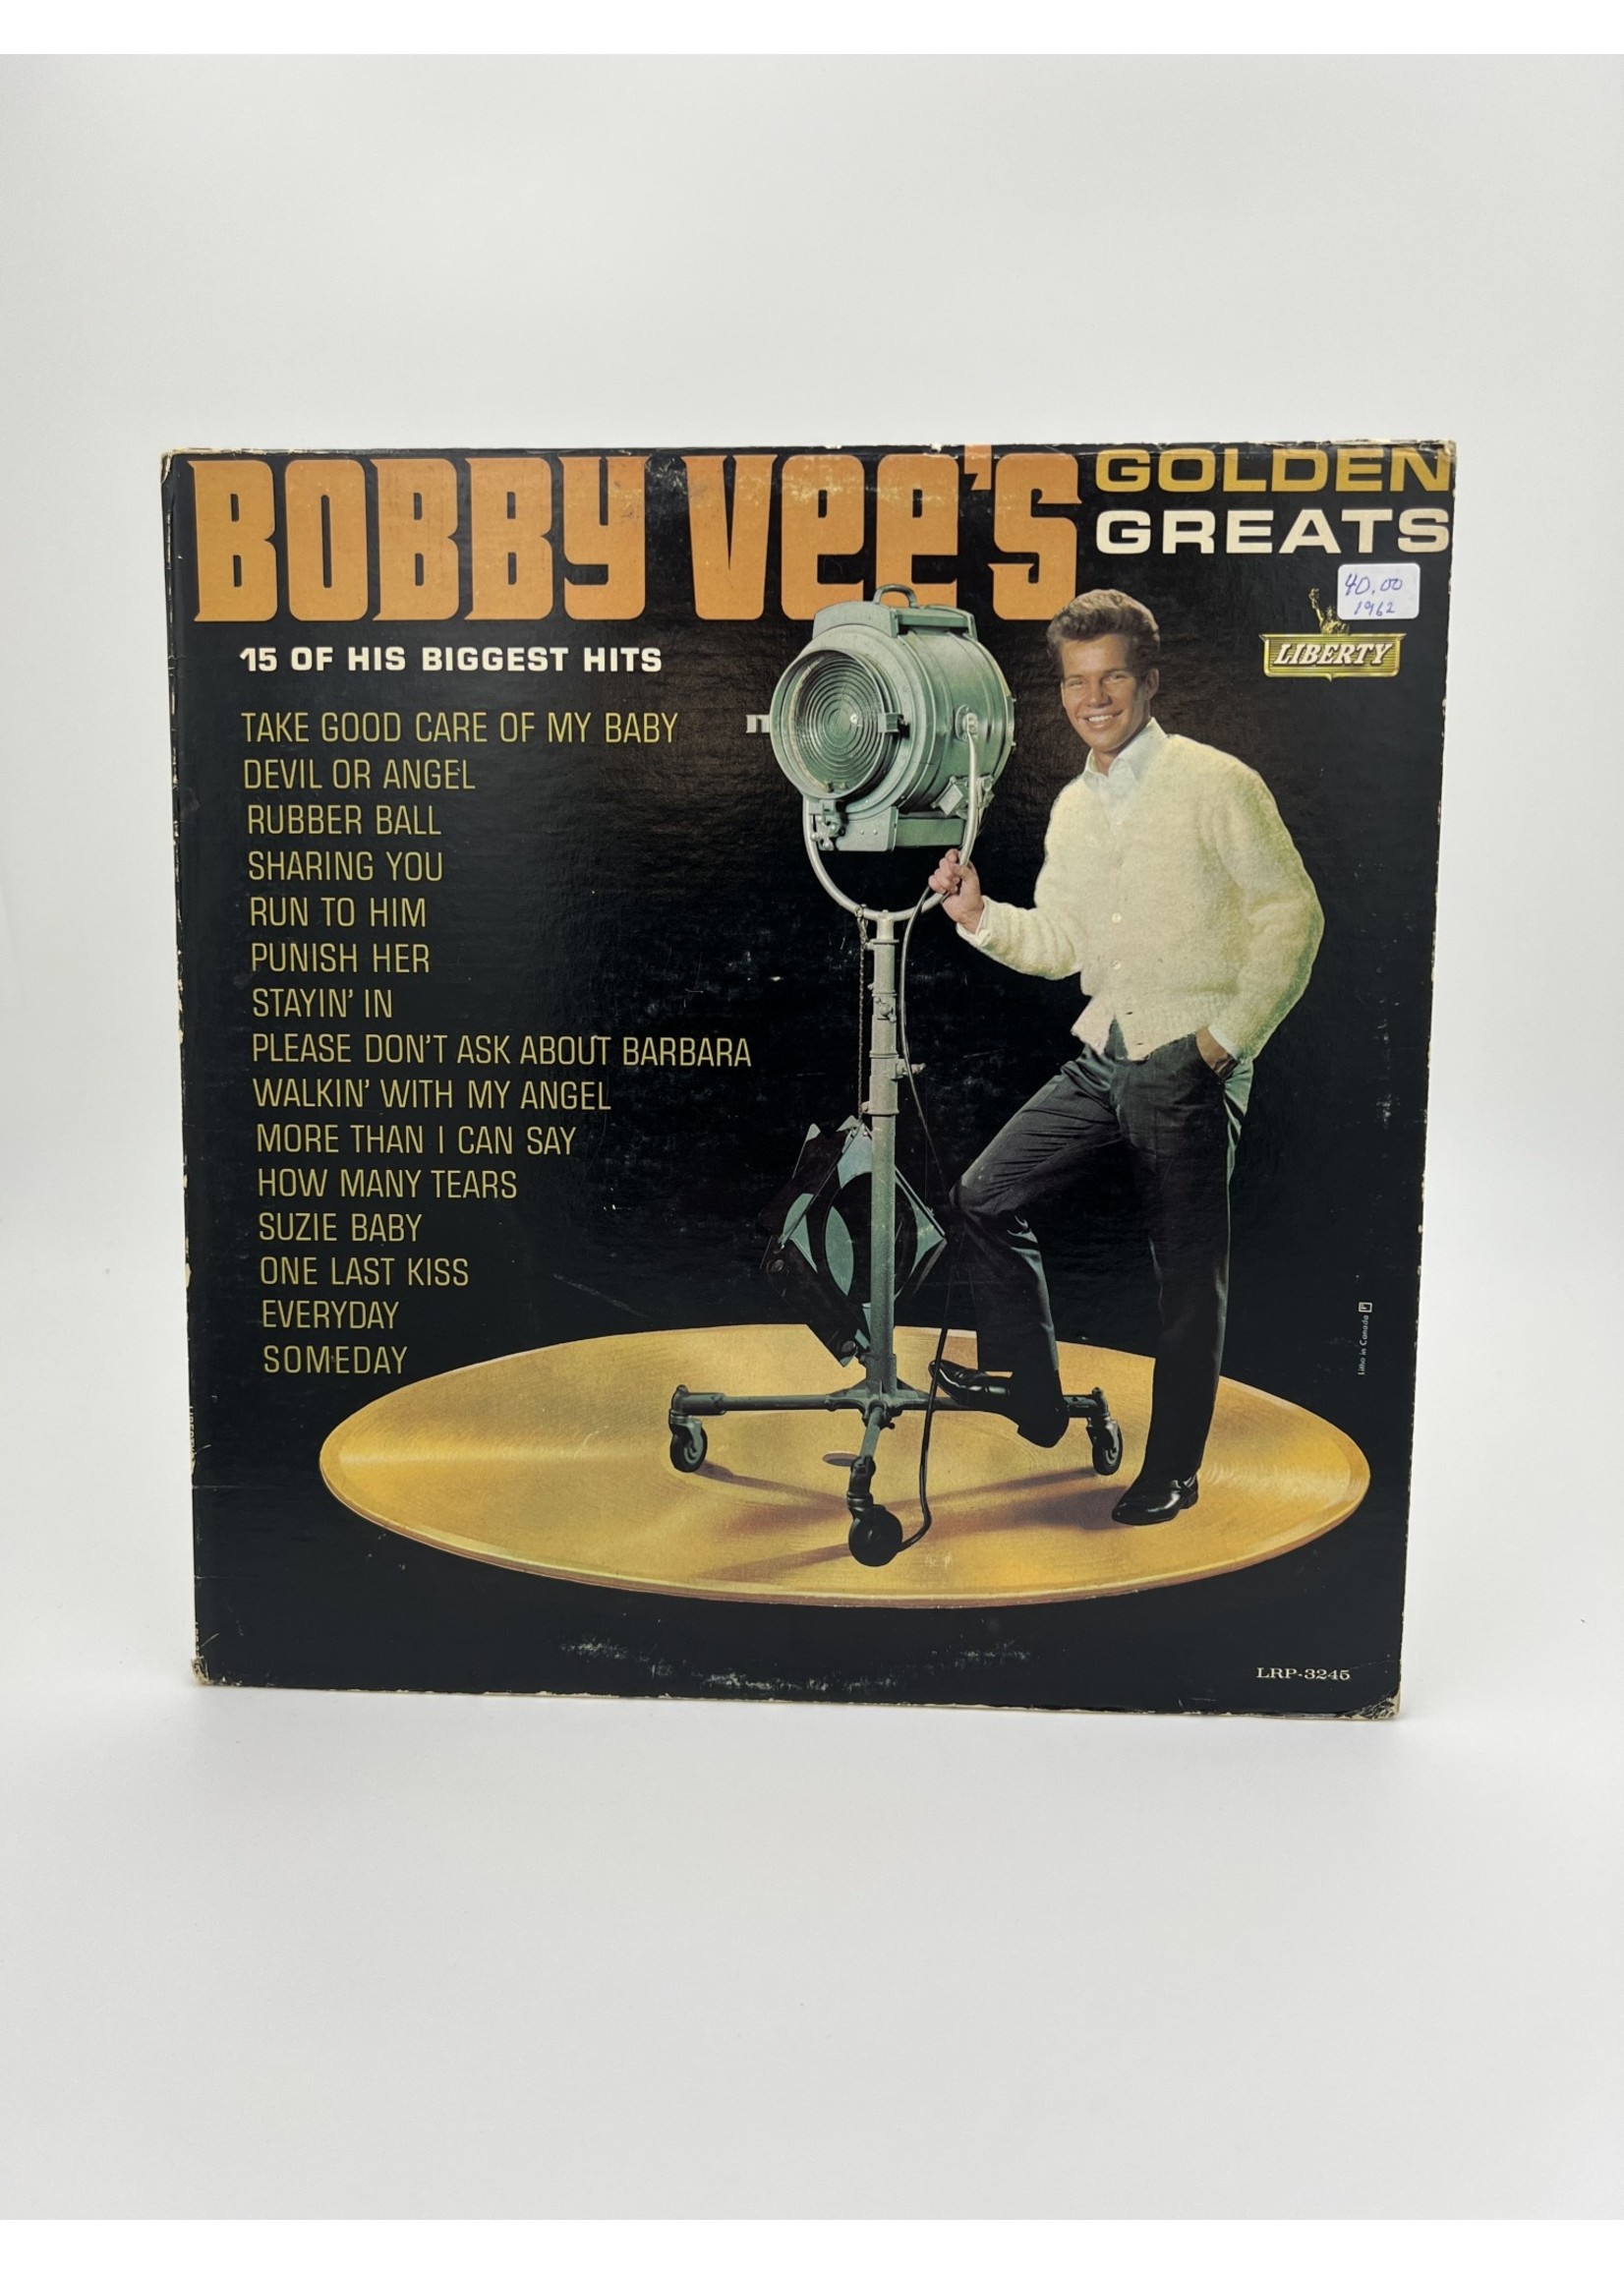 LP Bobby Vees Gold Greats 15 Of His Biggest Hits LP RECORD